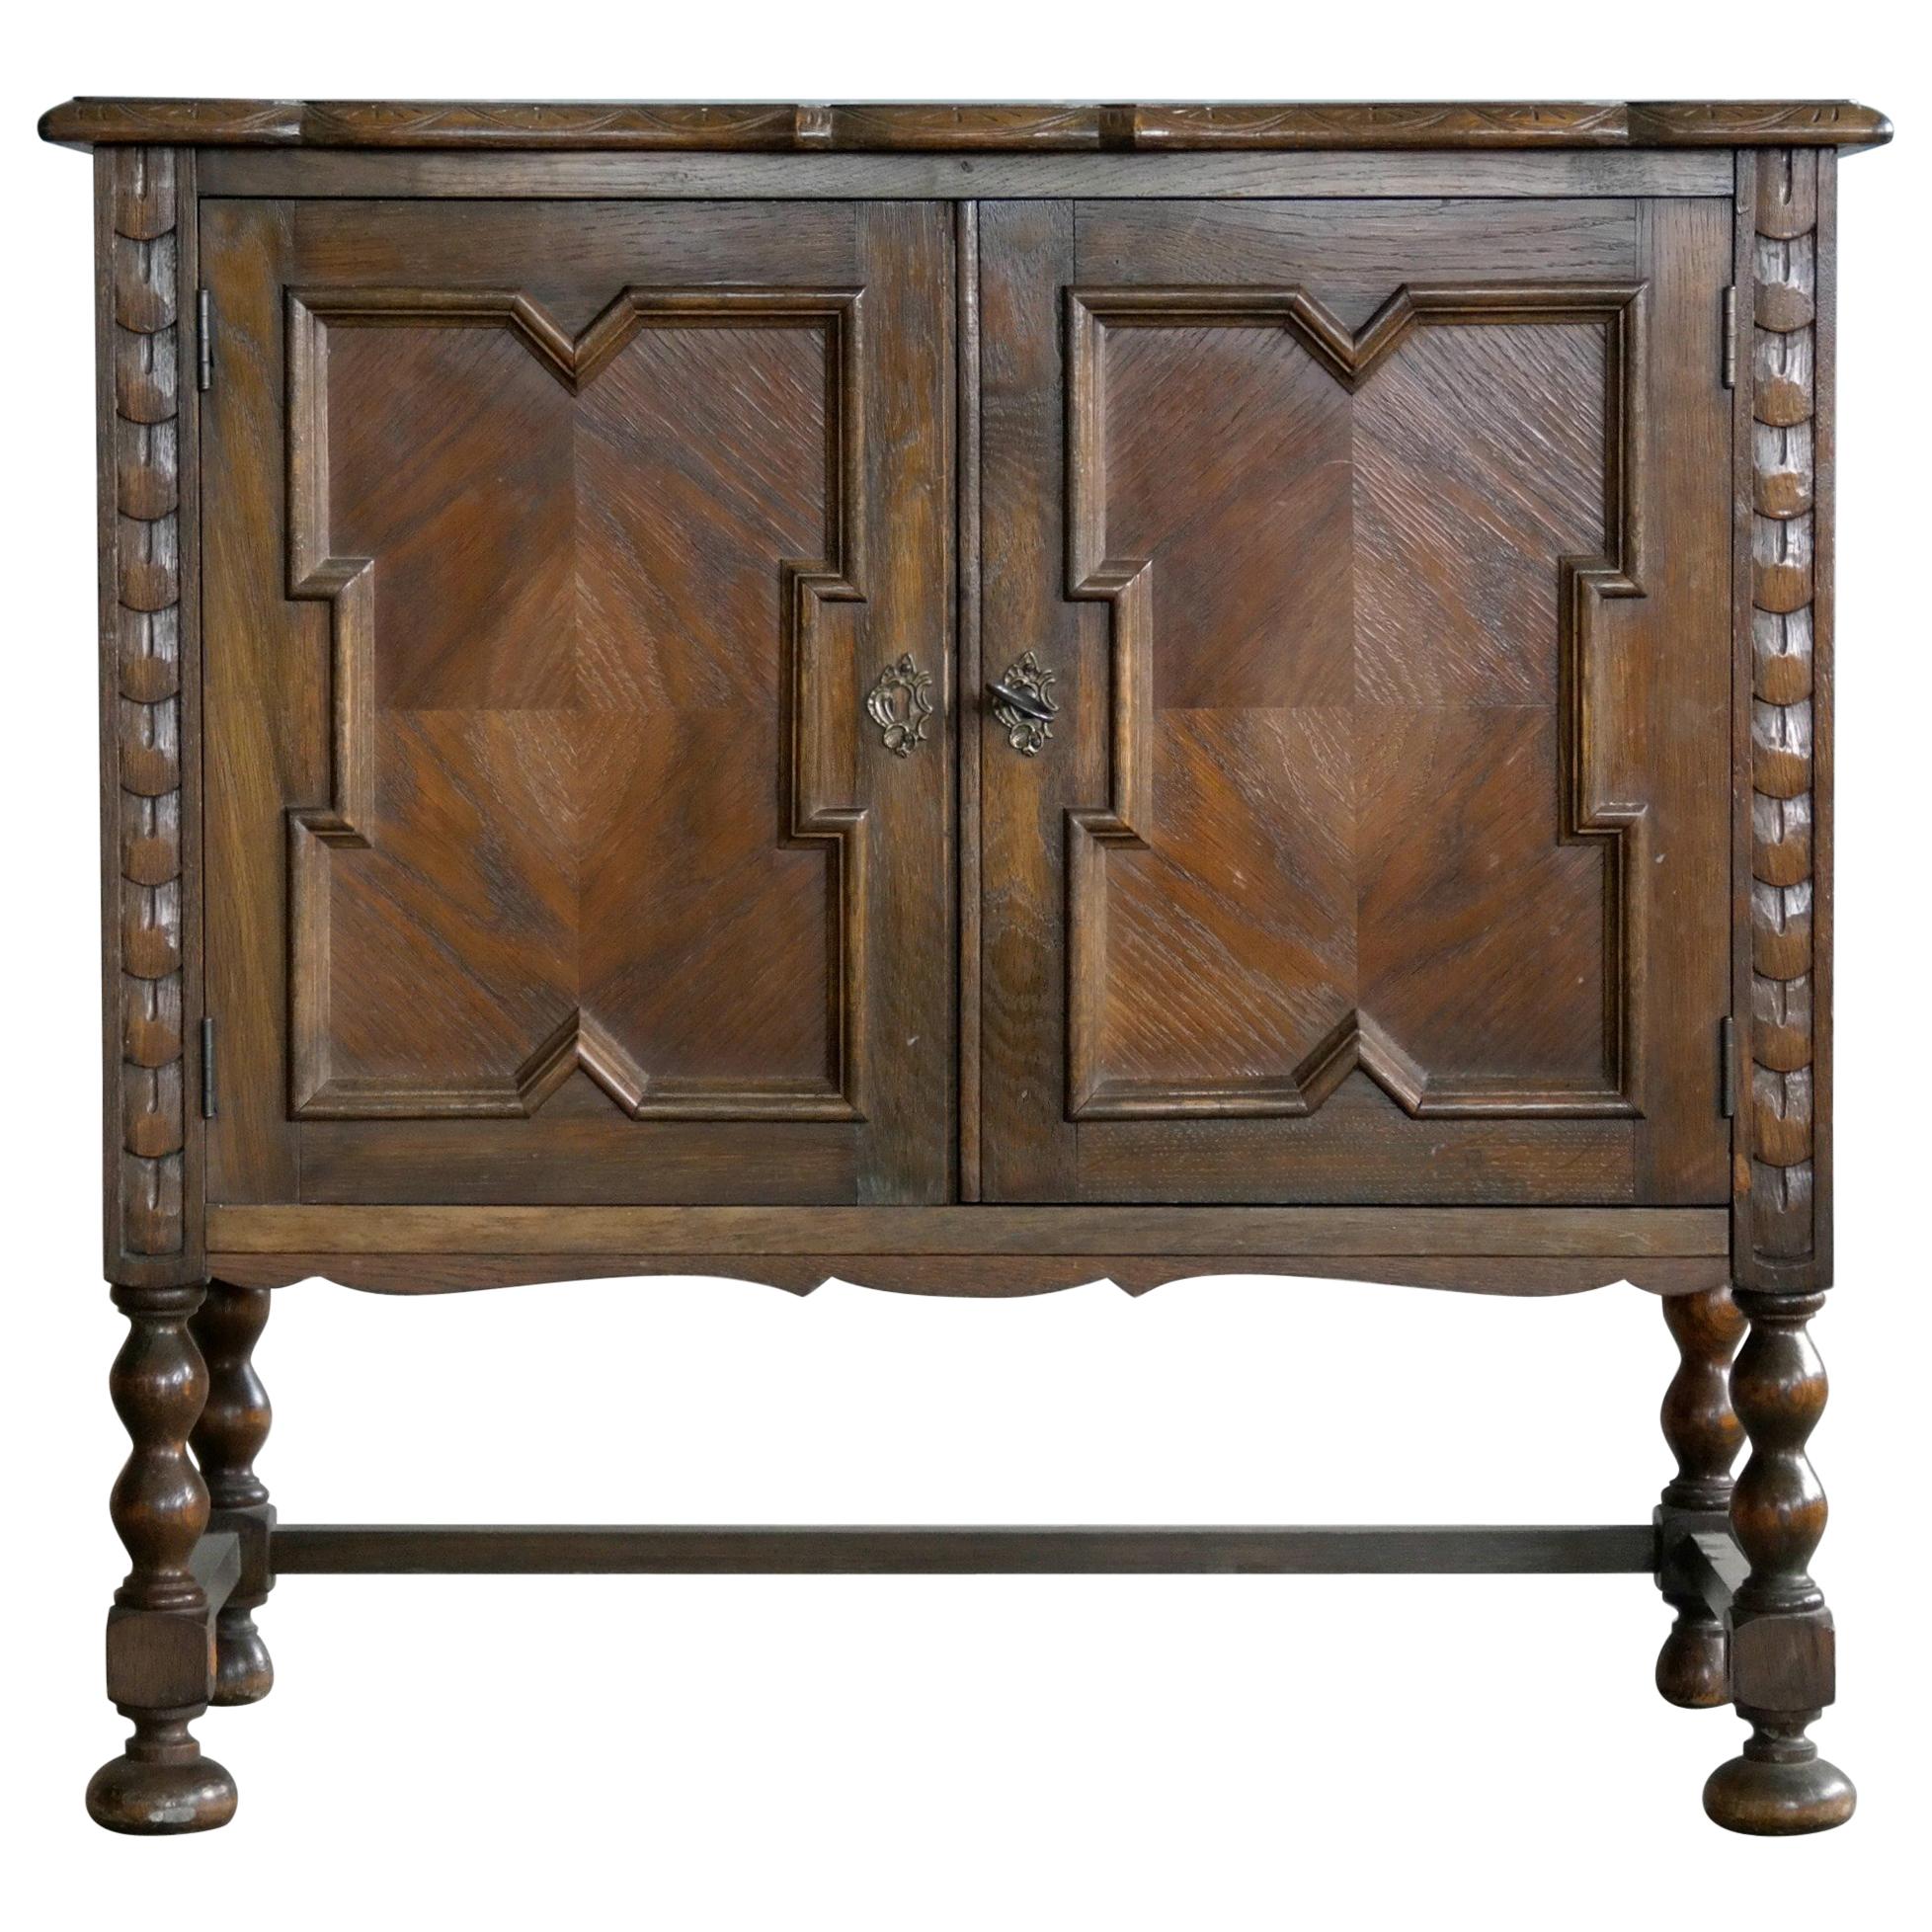 Axel Einar Hjorth Attributed Small Console or Cabinet in Stained Oak circa 1940s